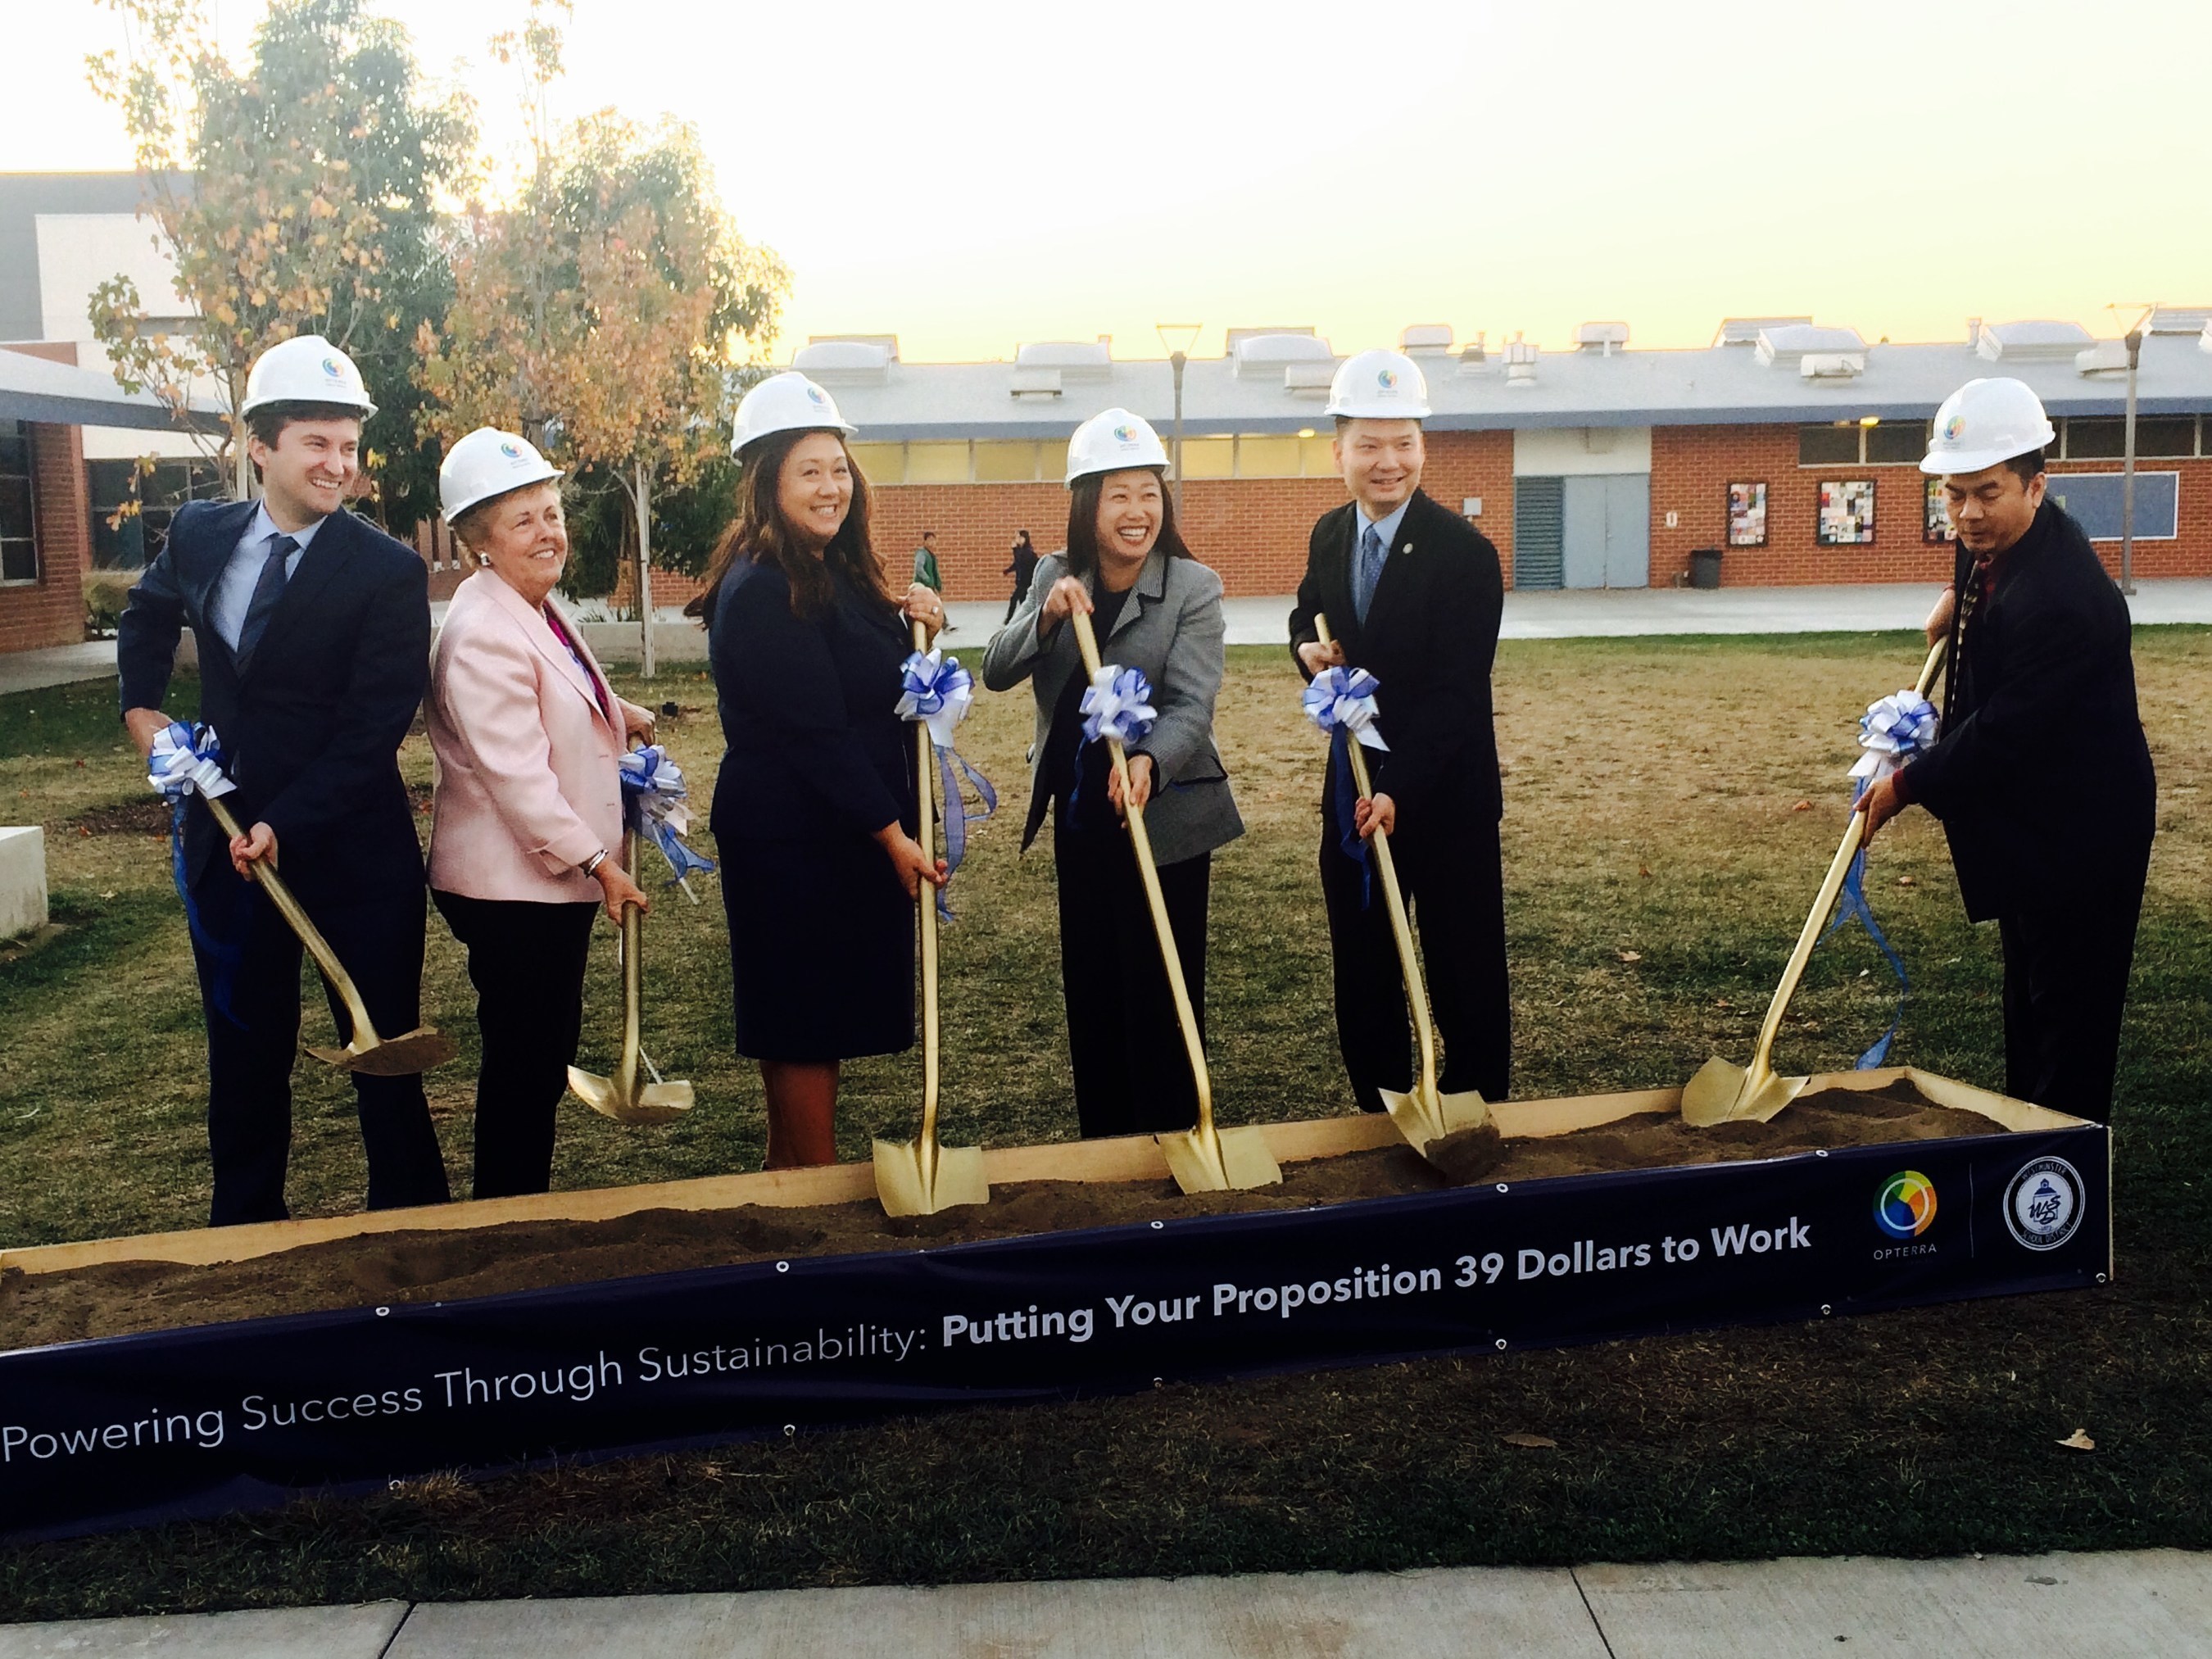 Westminster School District Board of Trustees, Superintendent Kim-Phelps, State Senator Janet Nguyen, and Mayor Tri Ta break ground on Westminster's district-wide Prop 39 sustainability program on Tuesday, December 1, 2015.